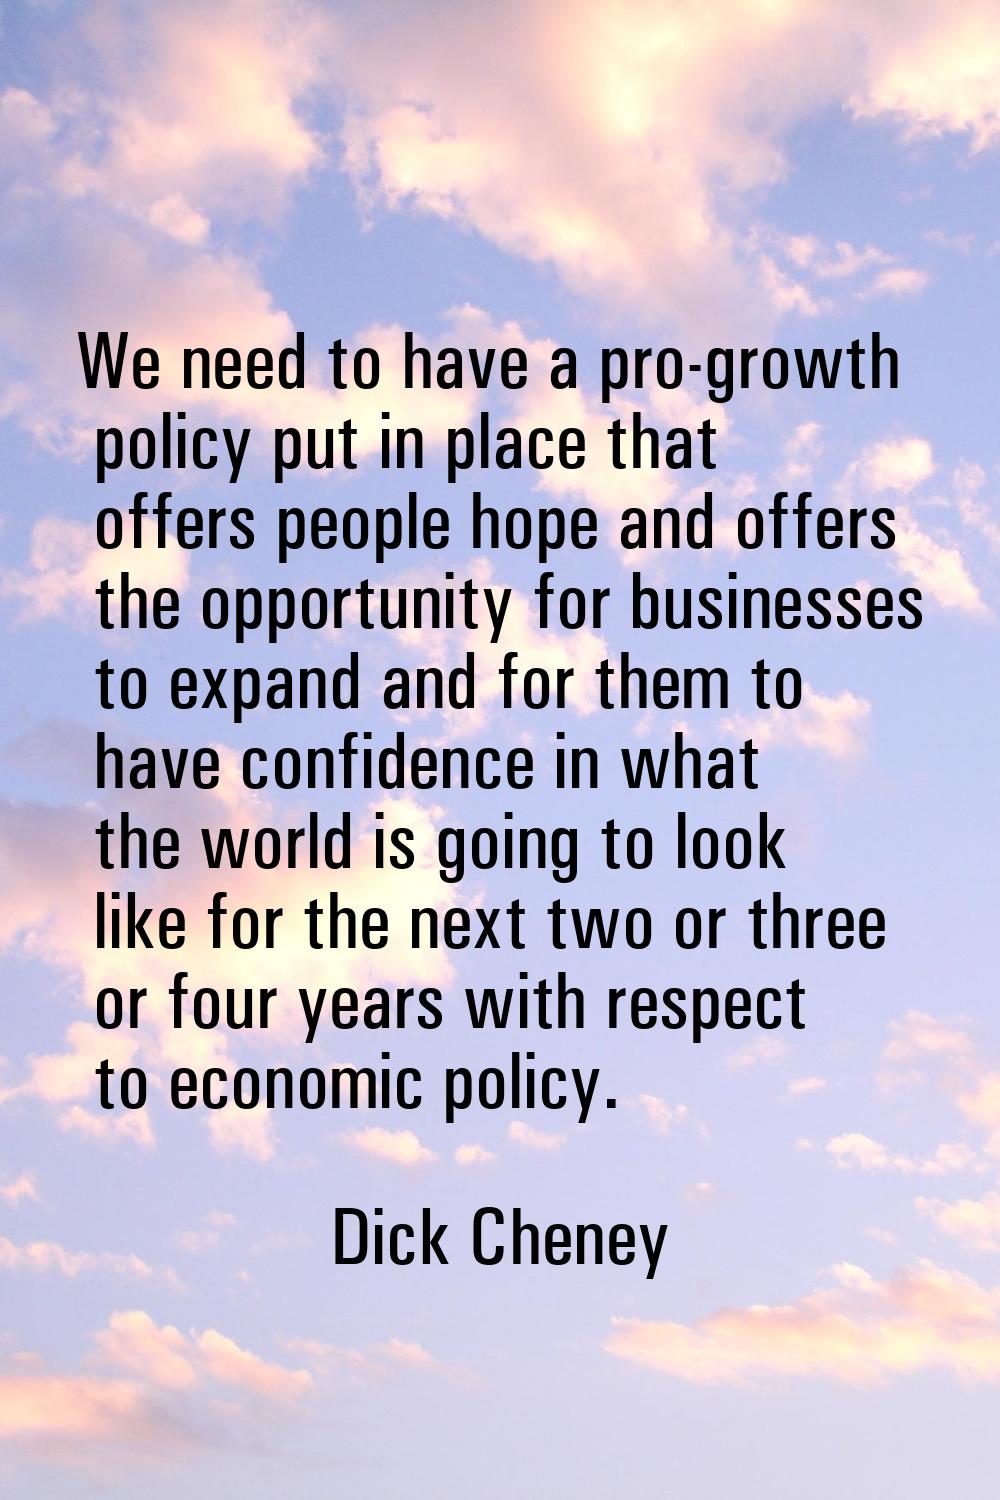 We need to have a pro-growth policy put in place that offers people hope and offers the opportunity